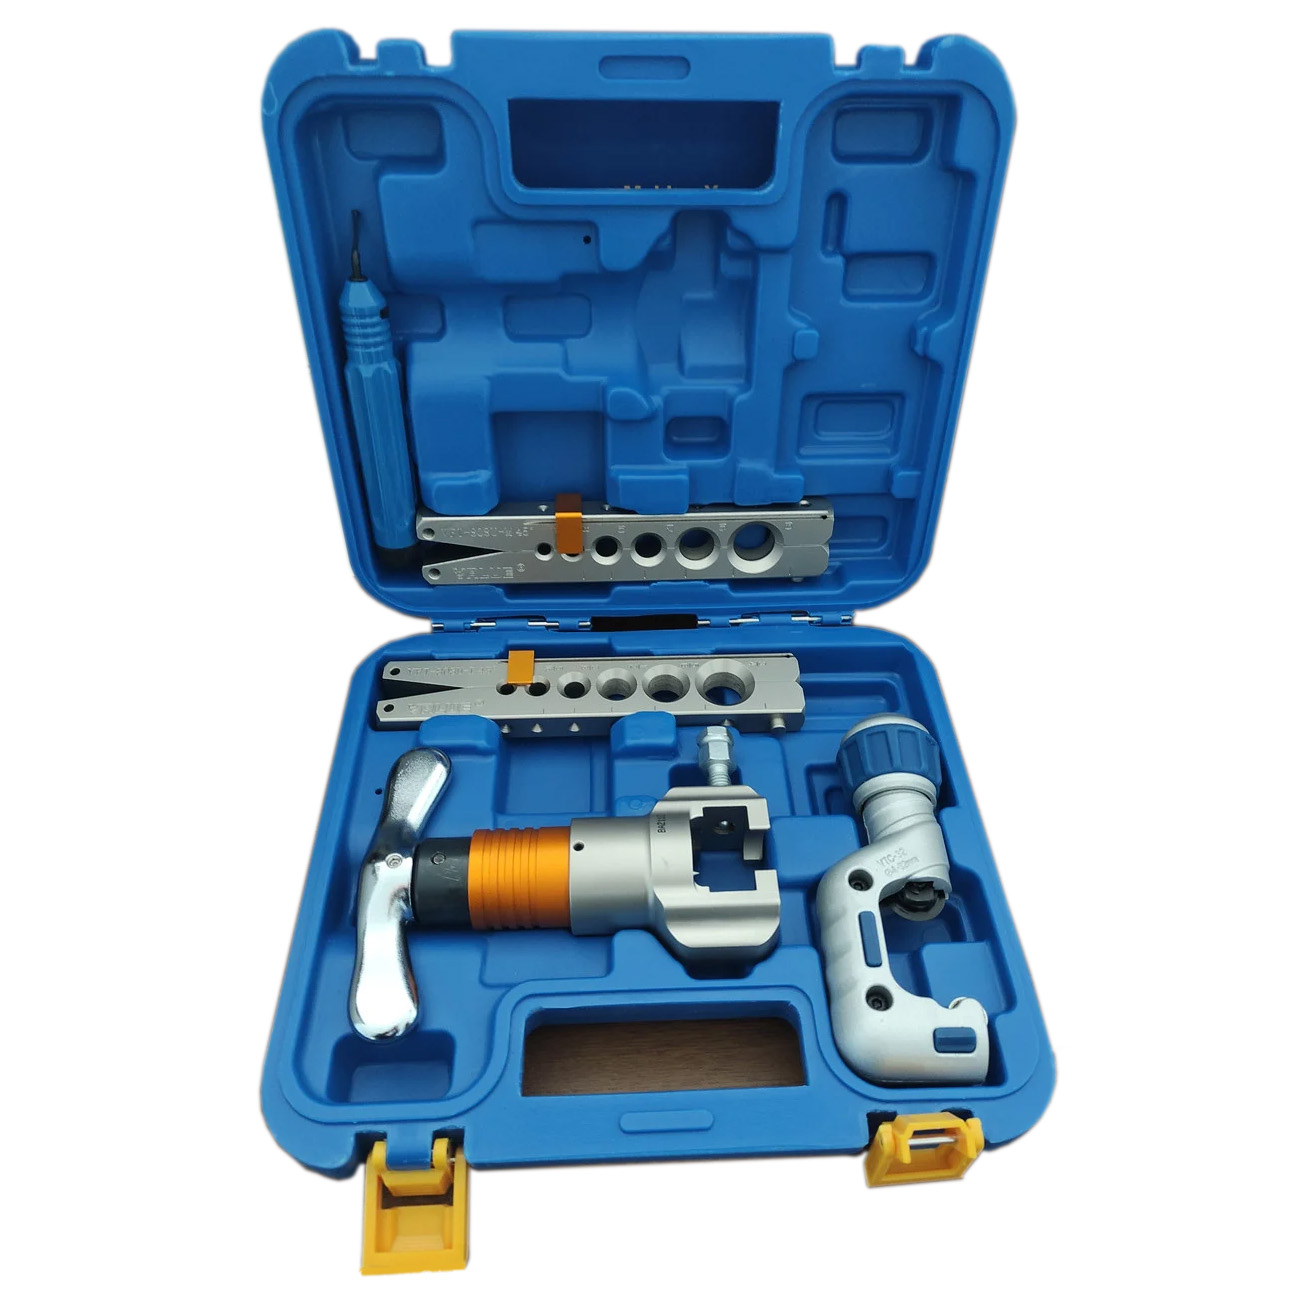 HVACR complete tool kit for installers and contractors